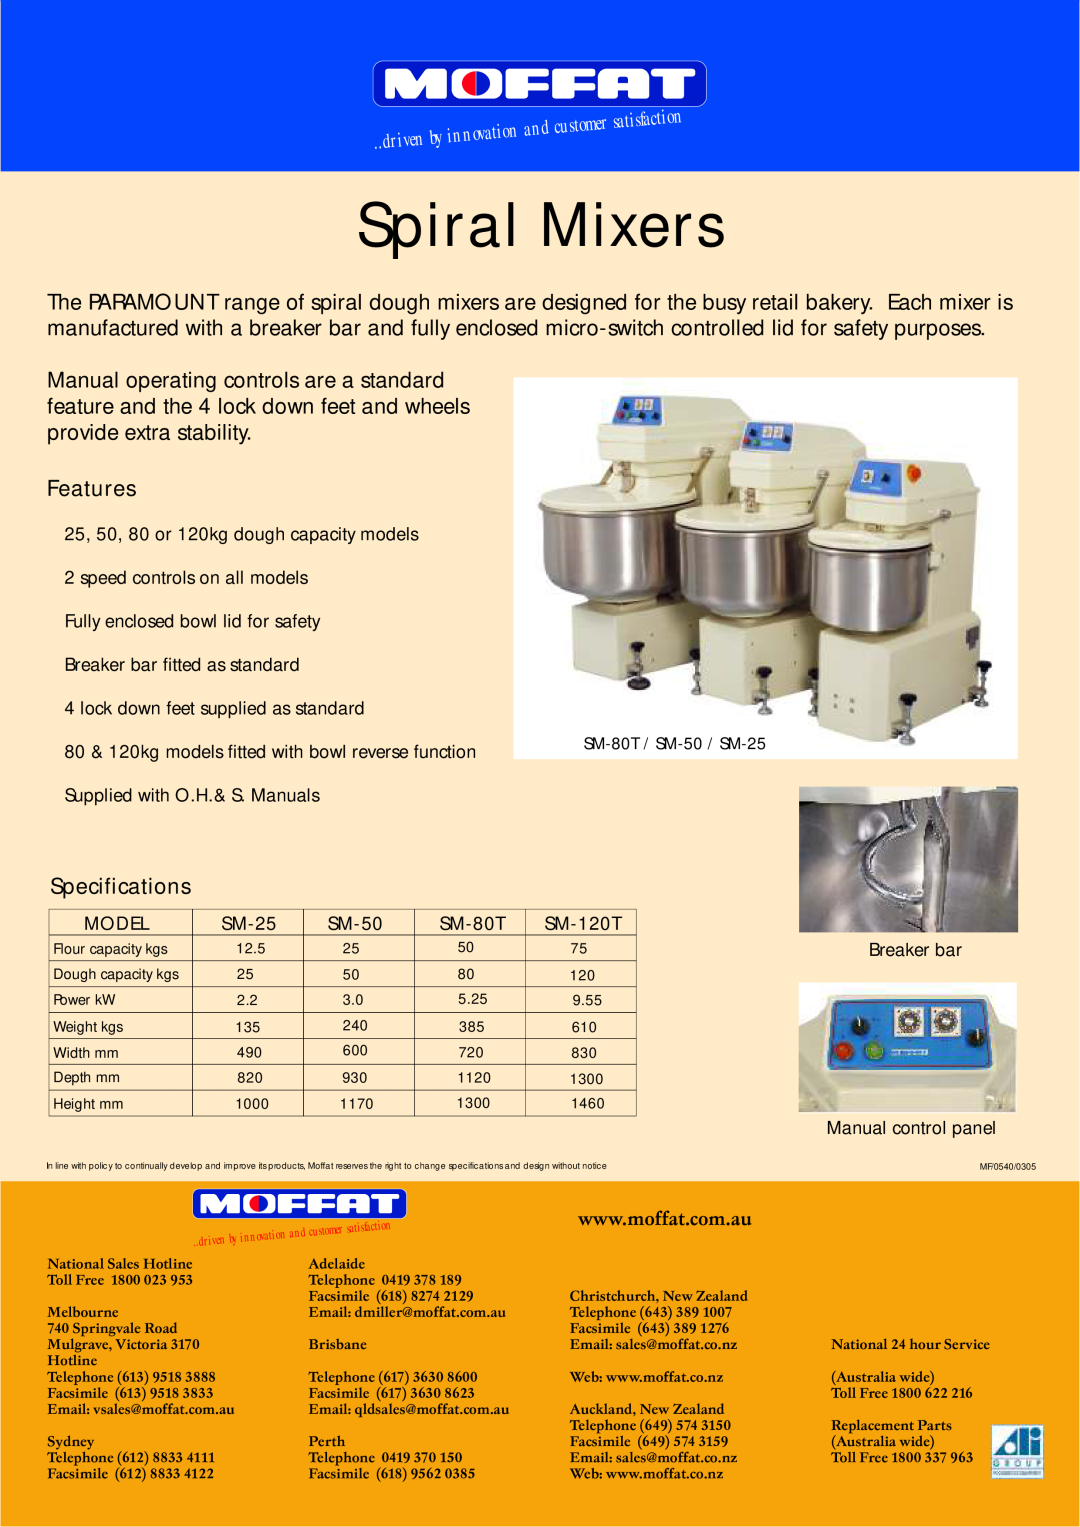 Moffat MF/0540/03.05 manual Spiral Mixers, sfact, sati, and custo, nova, by in, iven, Features, Specifications 